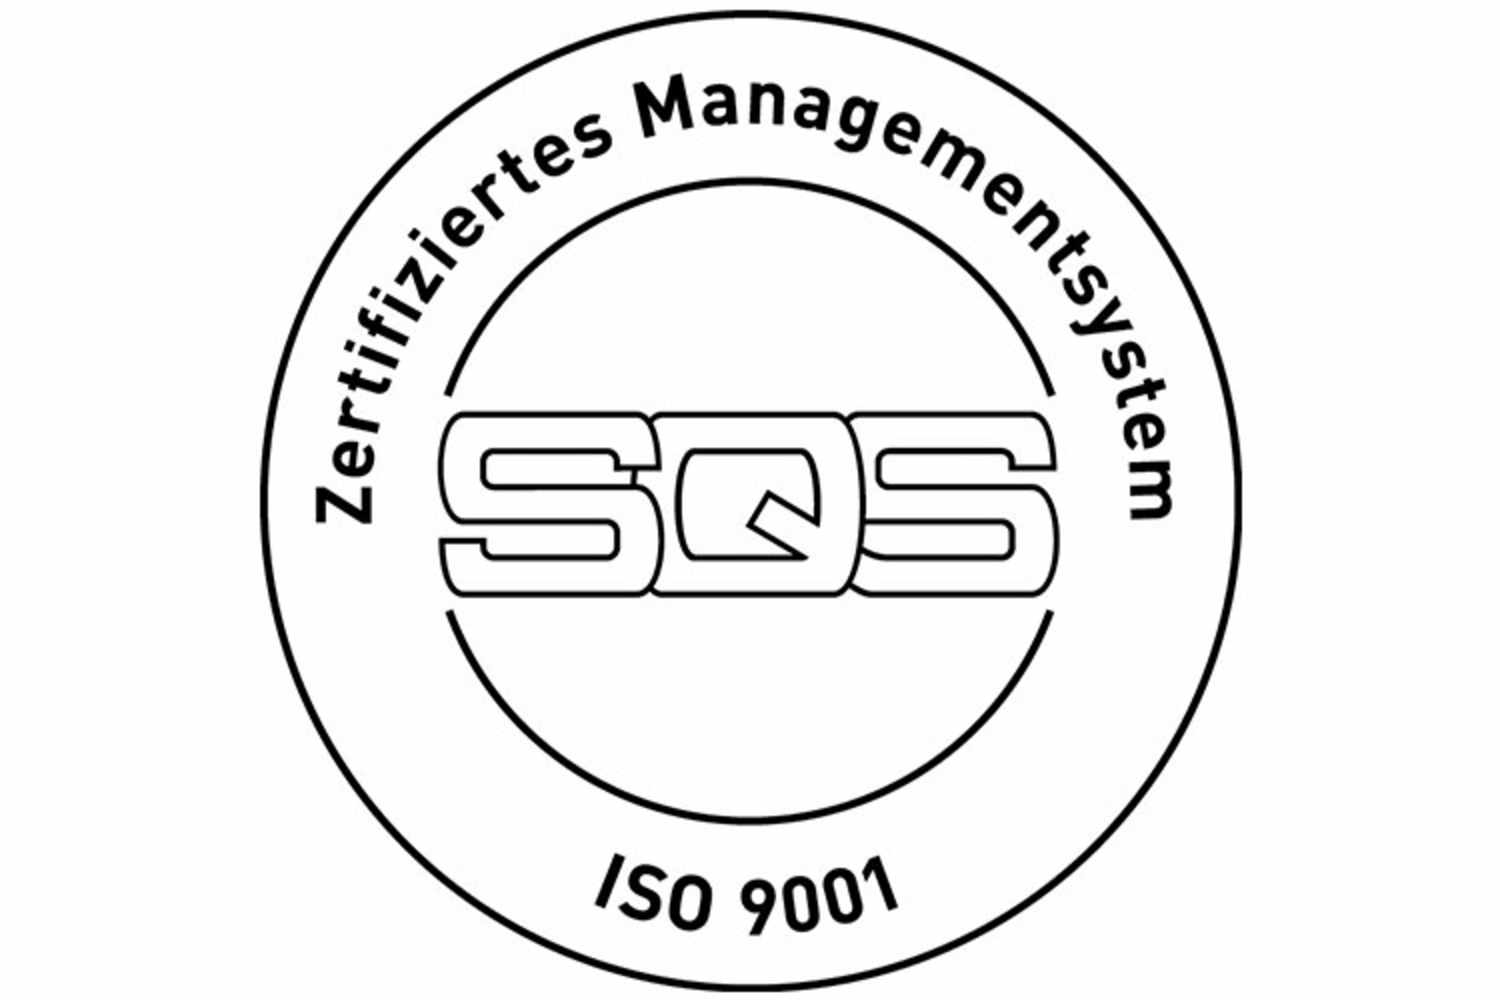 SQS Label for ISO 9001